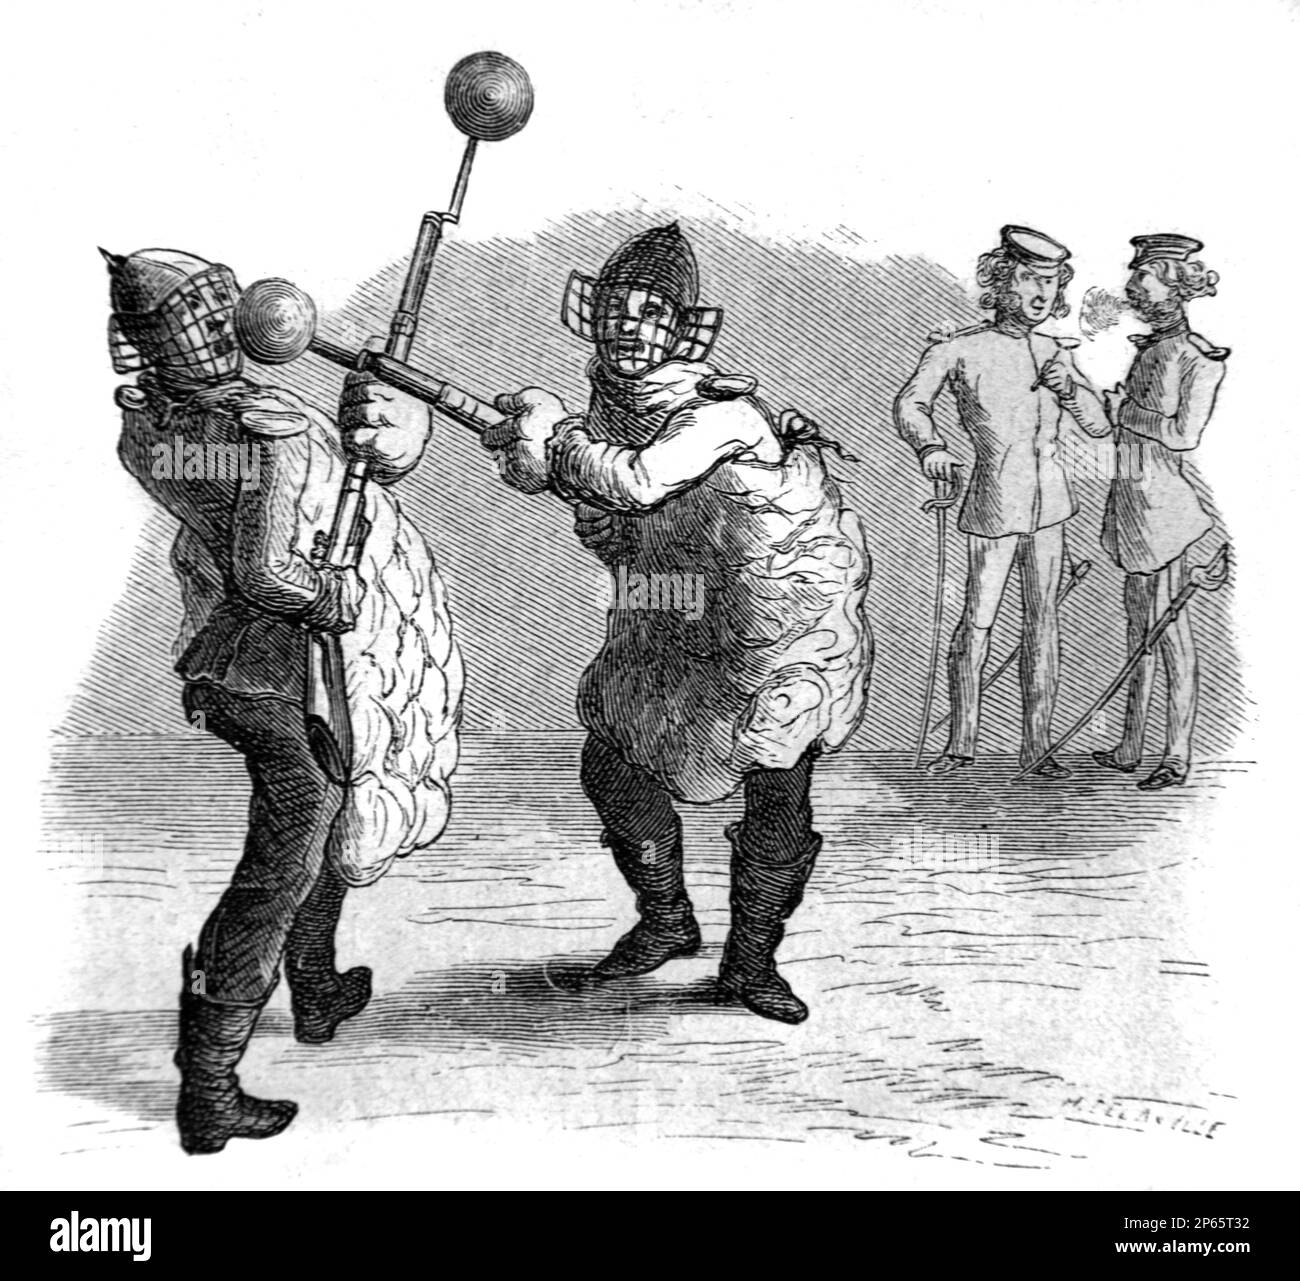 Early Fencers Practising Fencing with Bayonets Protected with Rubber Balls Munich Germany. Vintage Engraving or Illustration 1862 Stock Photo